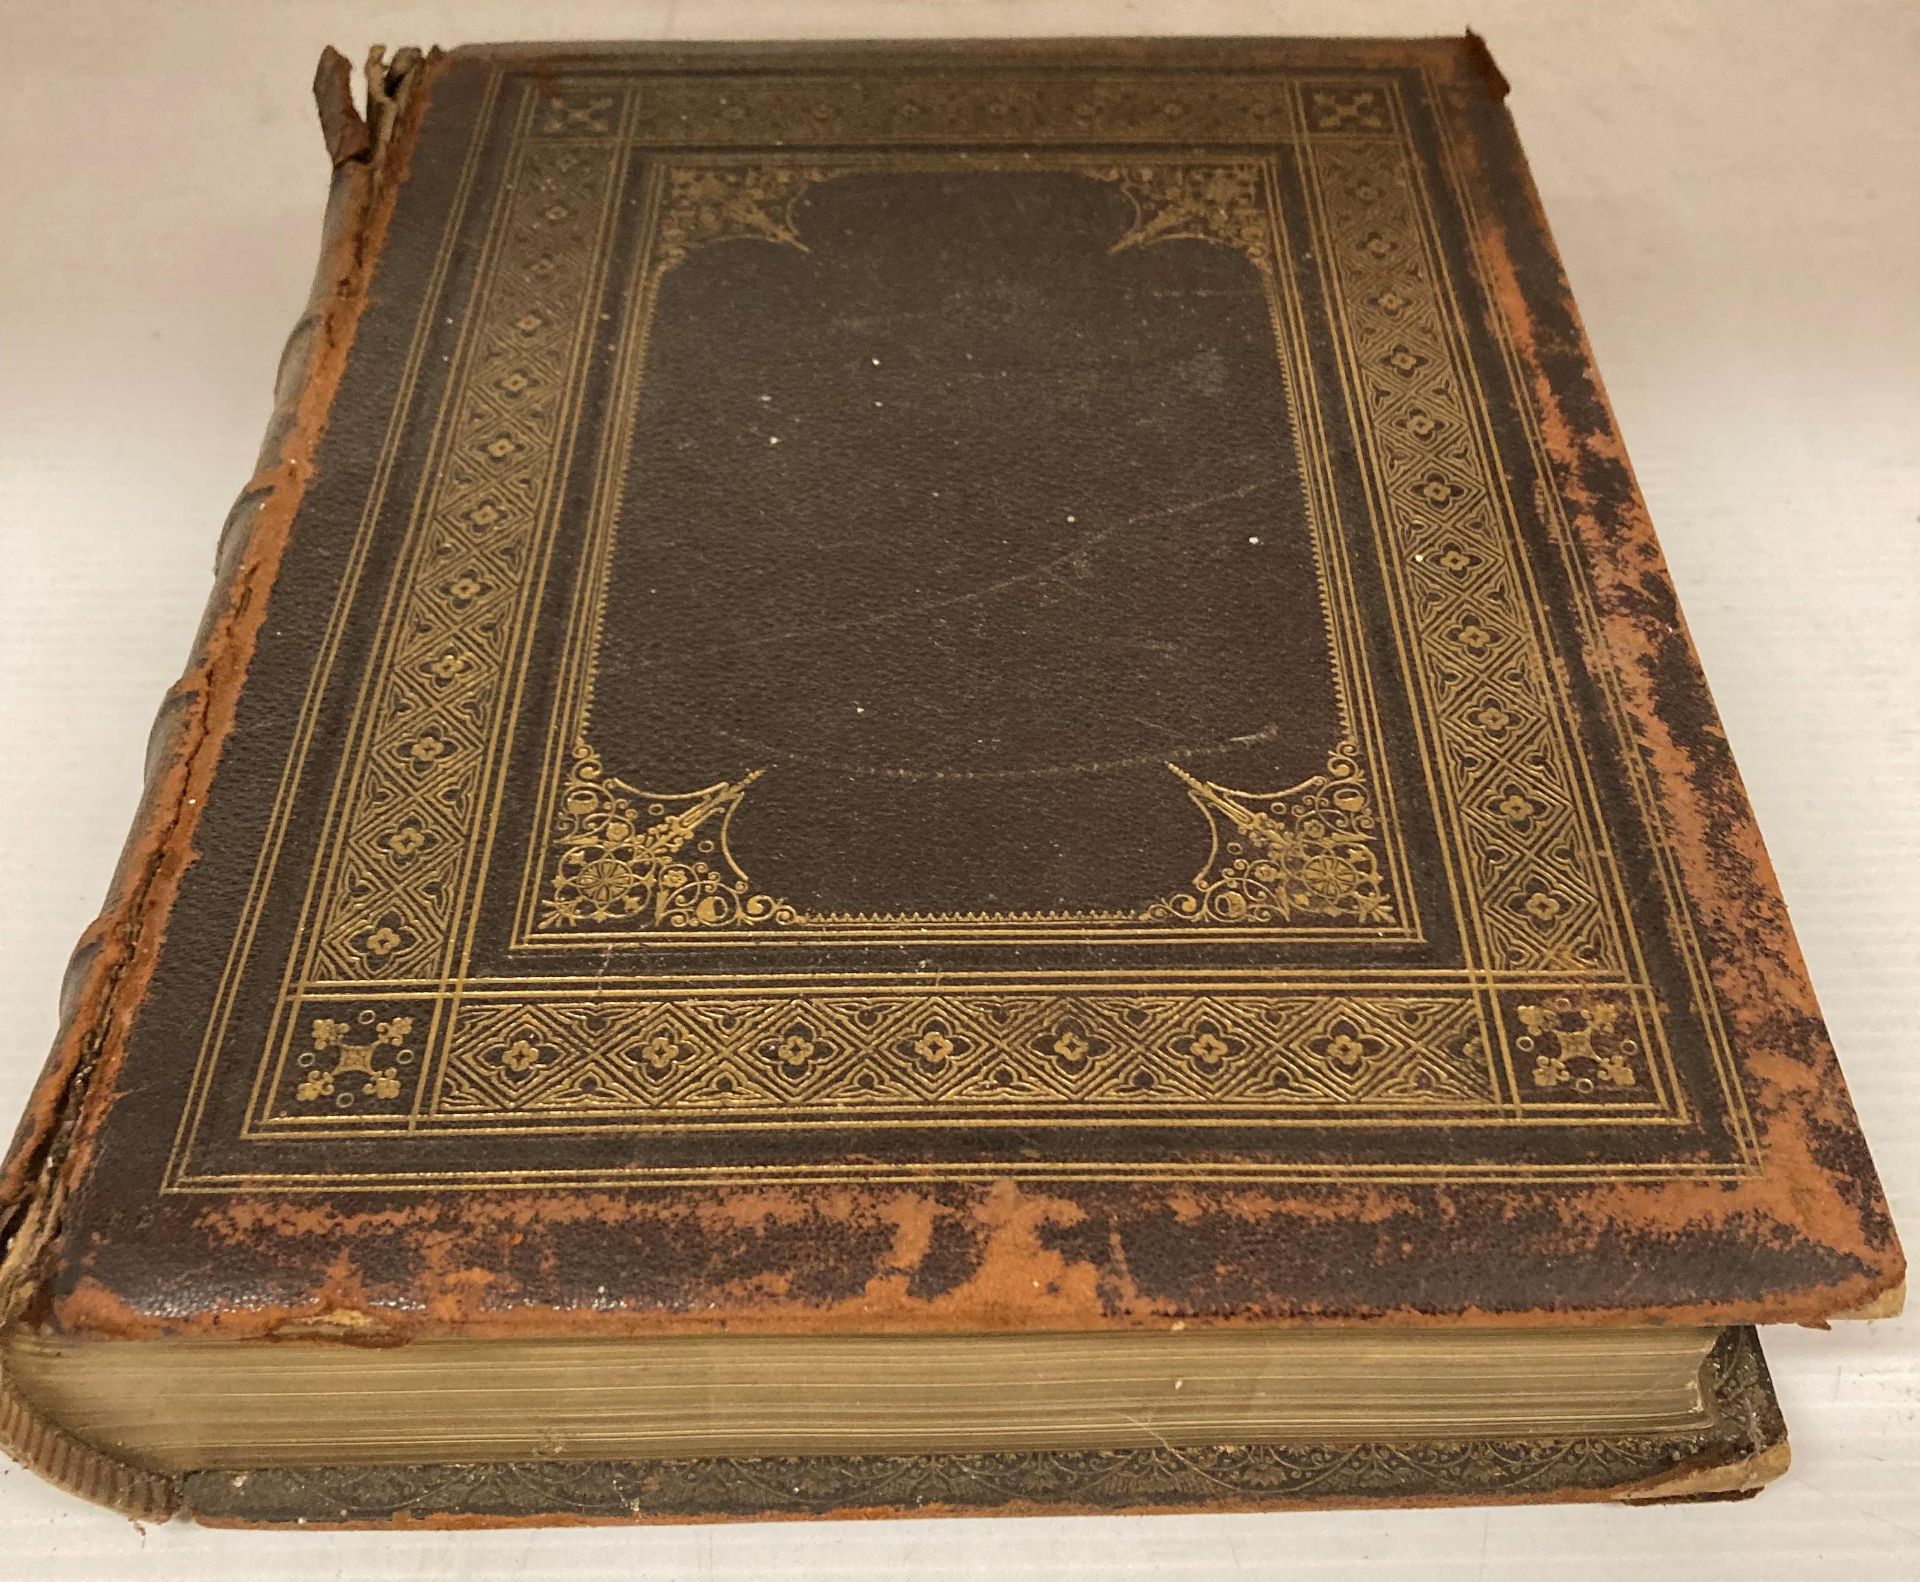 Two books 'The Poetical Works of Henry Wadsworth Longfellow' published by Cassell, Pelter, - Image 7 of 8